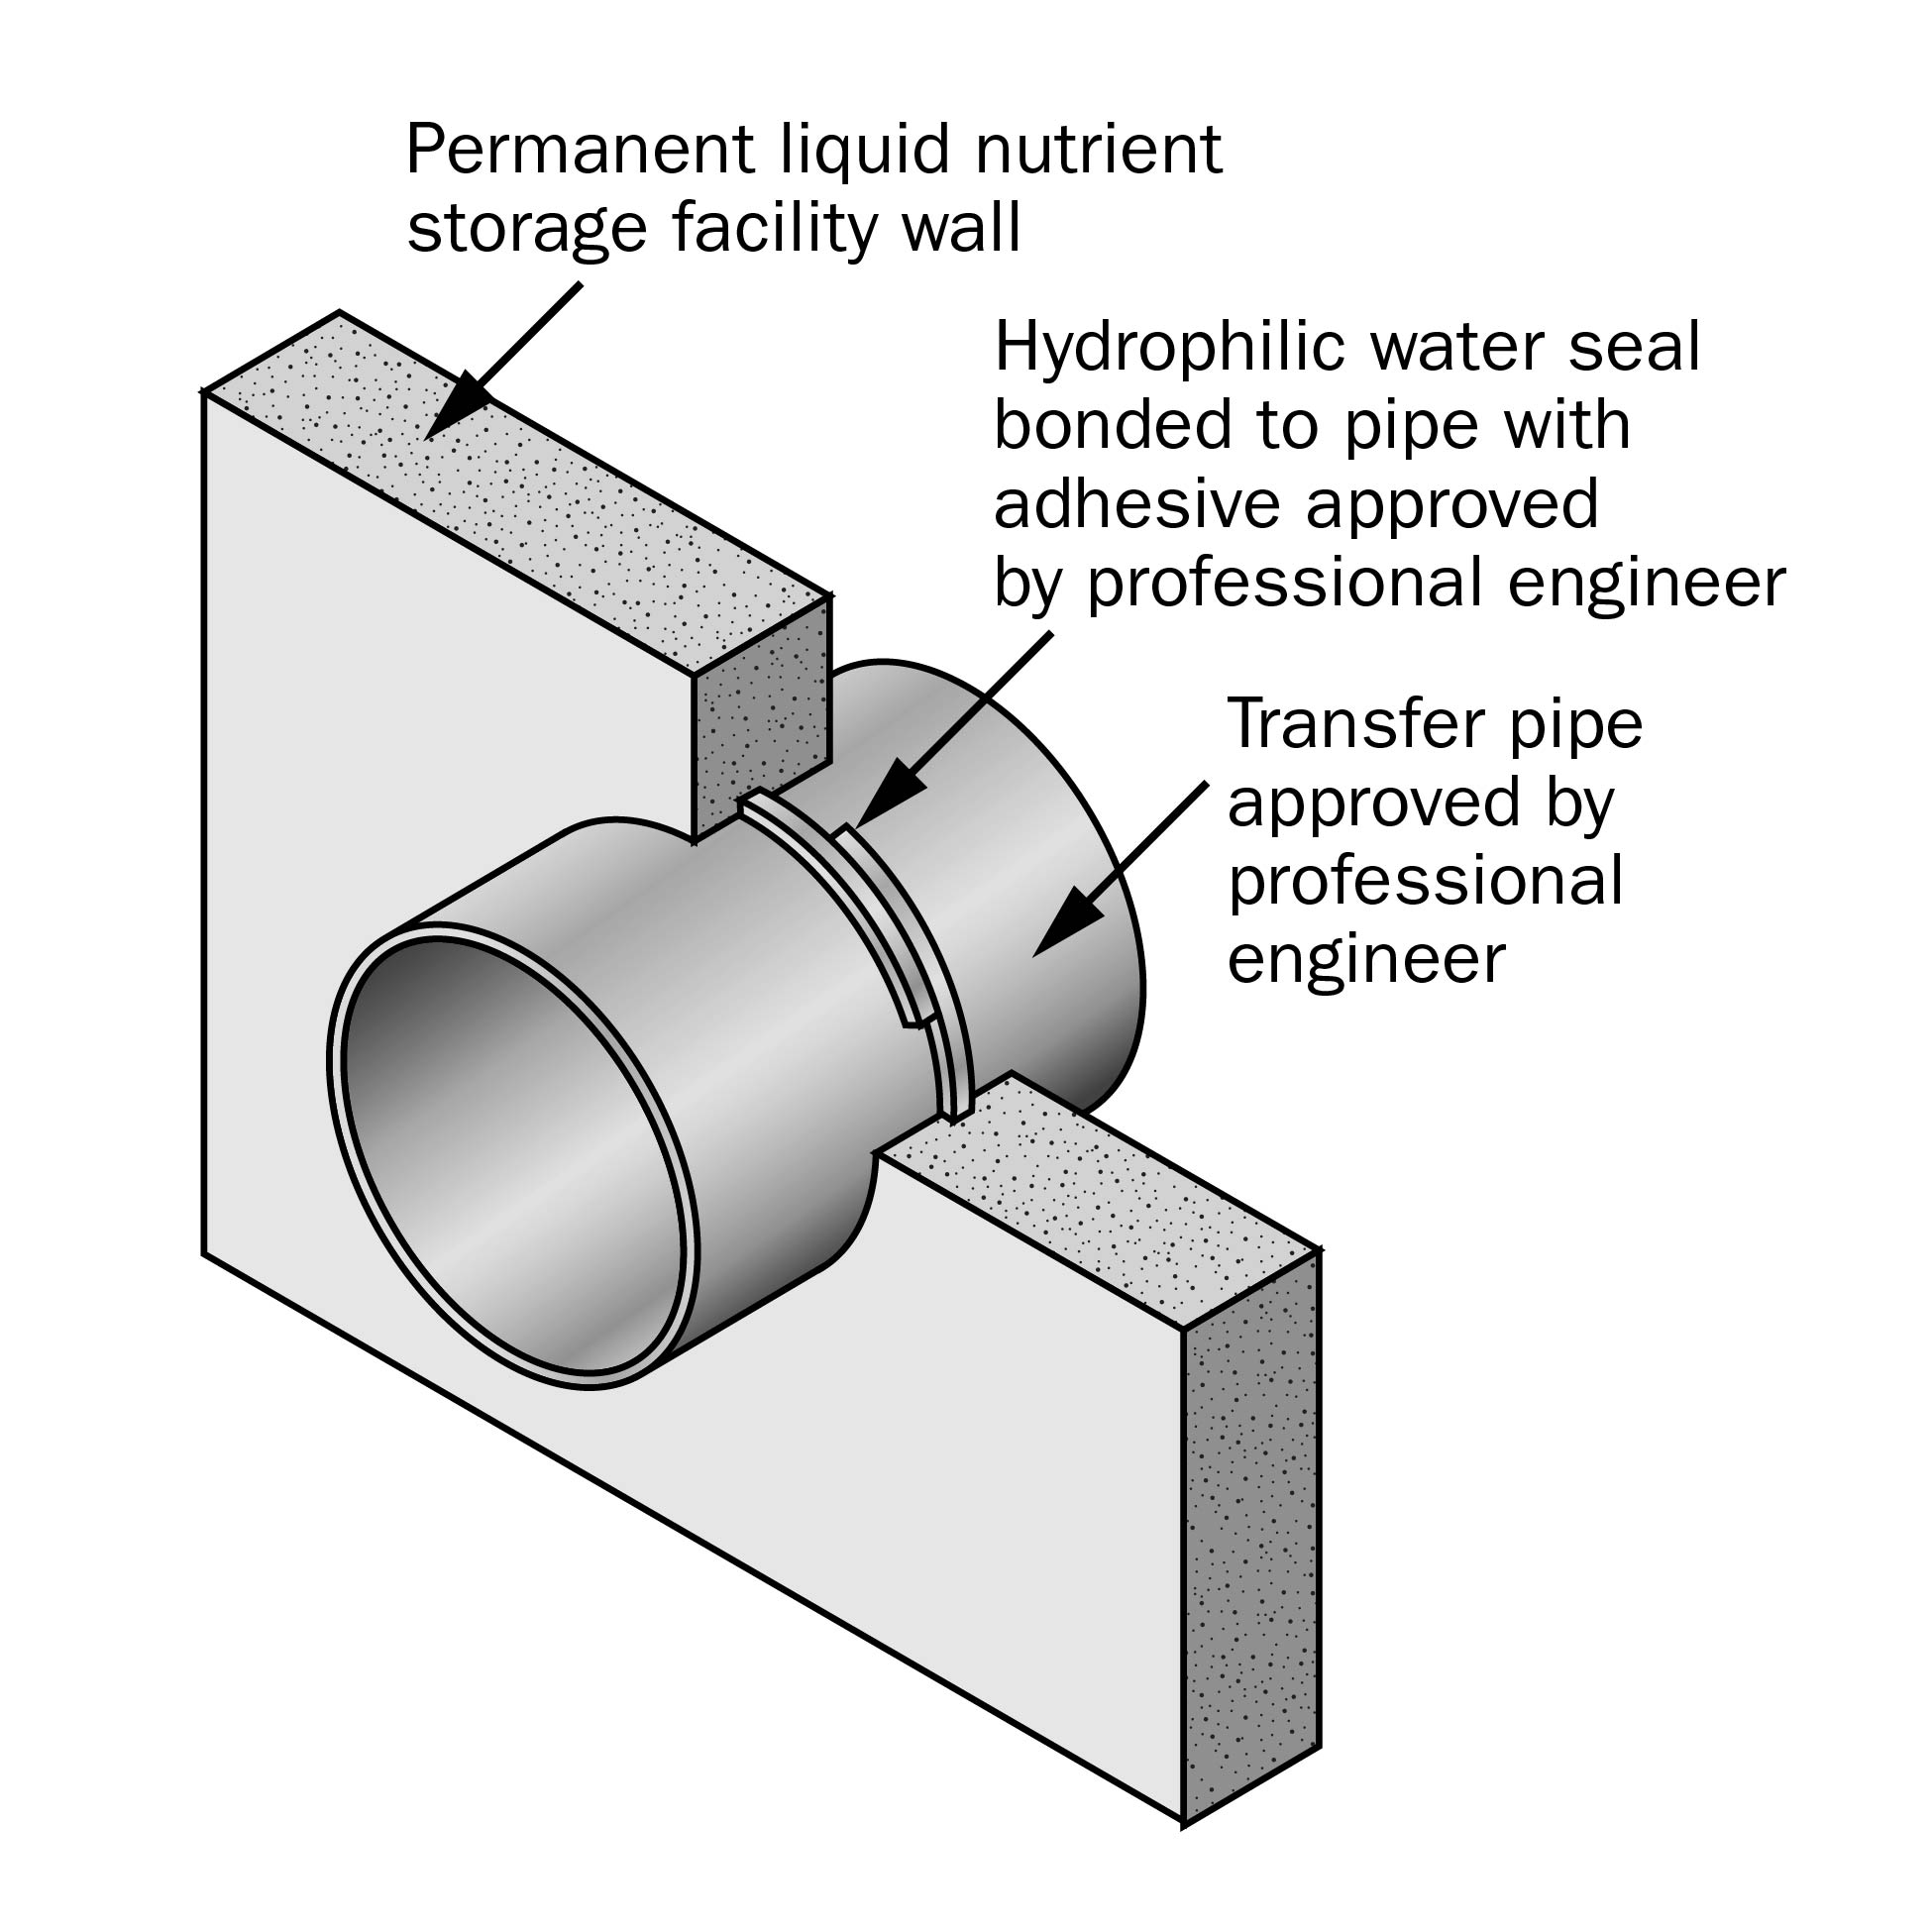 A drawing showing a cutaway sketch of a hydrophilic water seal between the pipe and wall opening, which prevents leakage at the opening.